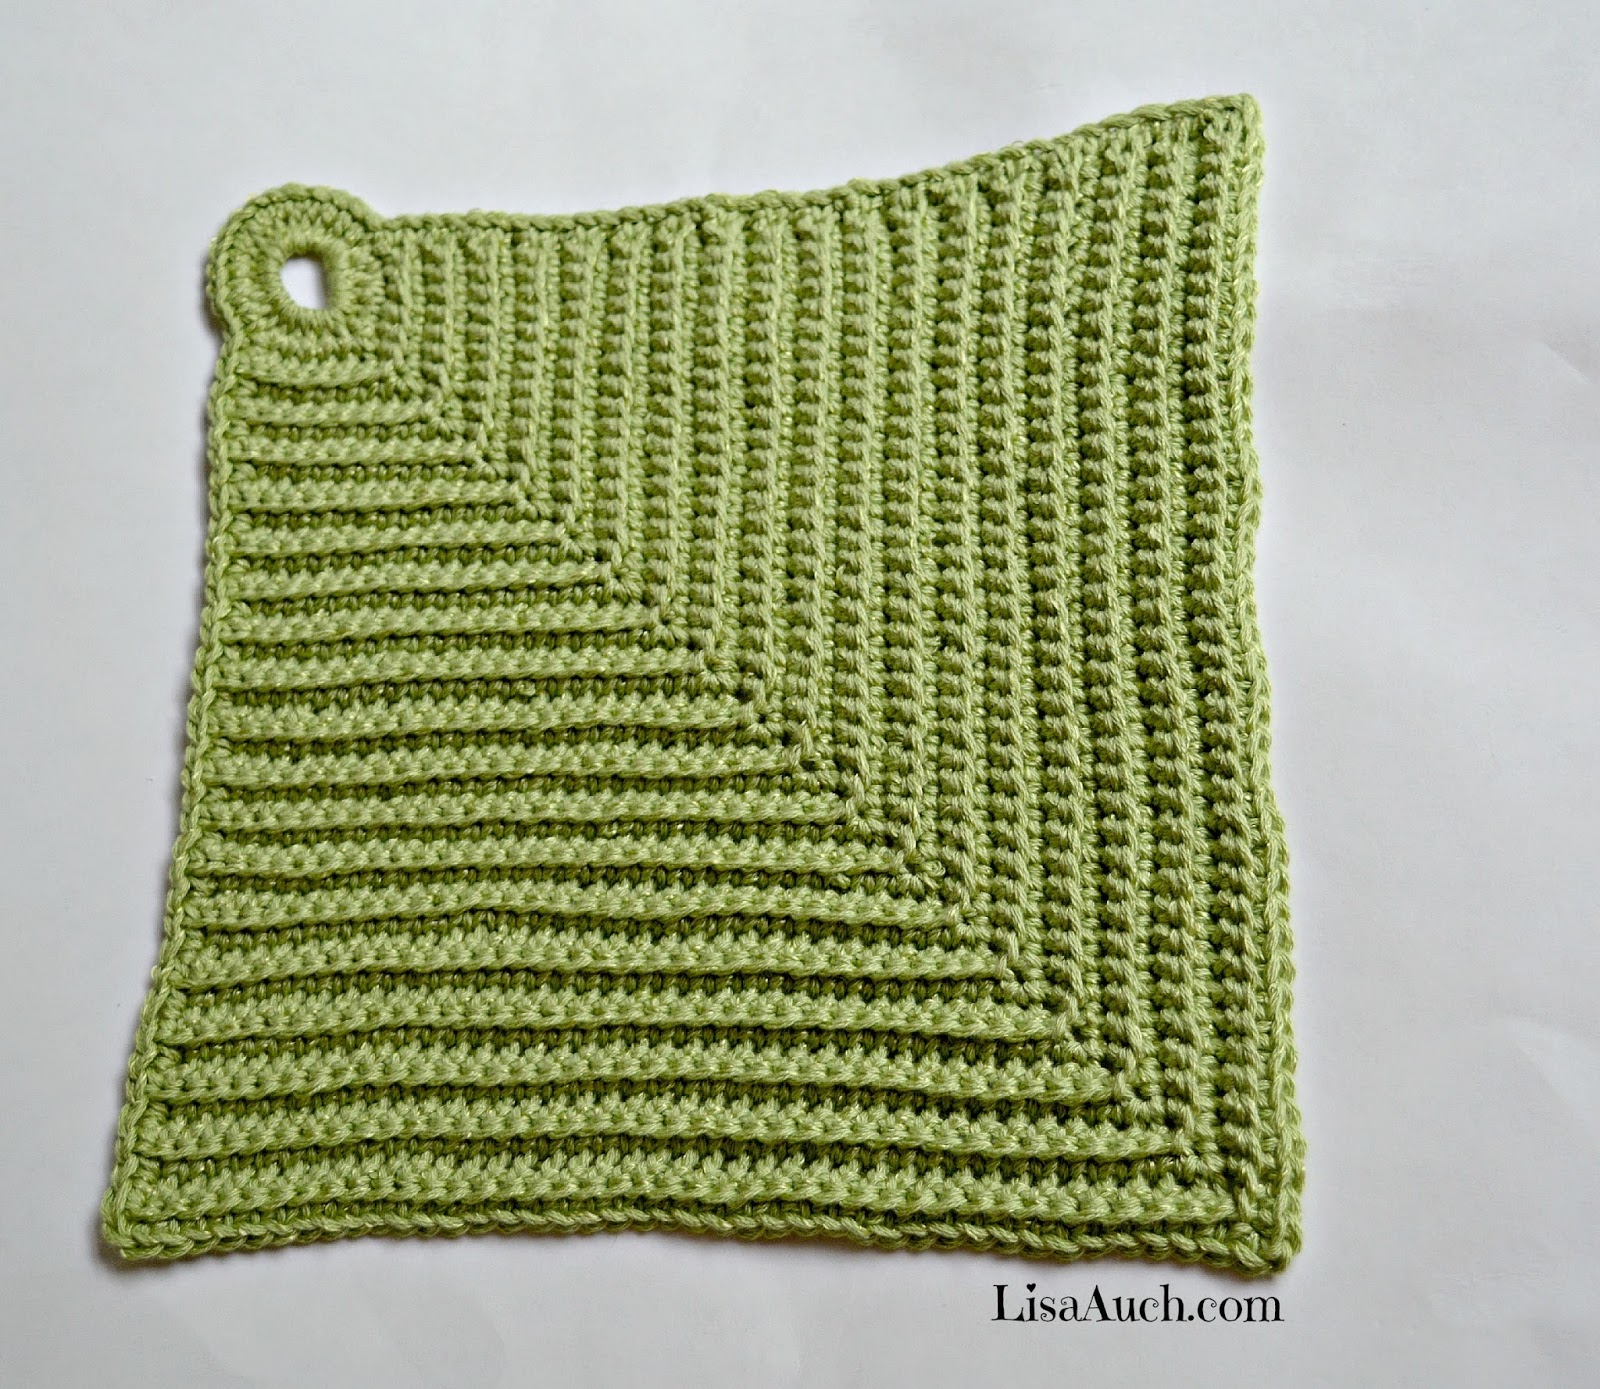 Free Easy Crochet Patterns Free Crochet Patterns And Designs Lisaauch Free Easy Crochet